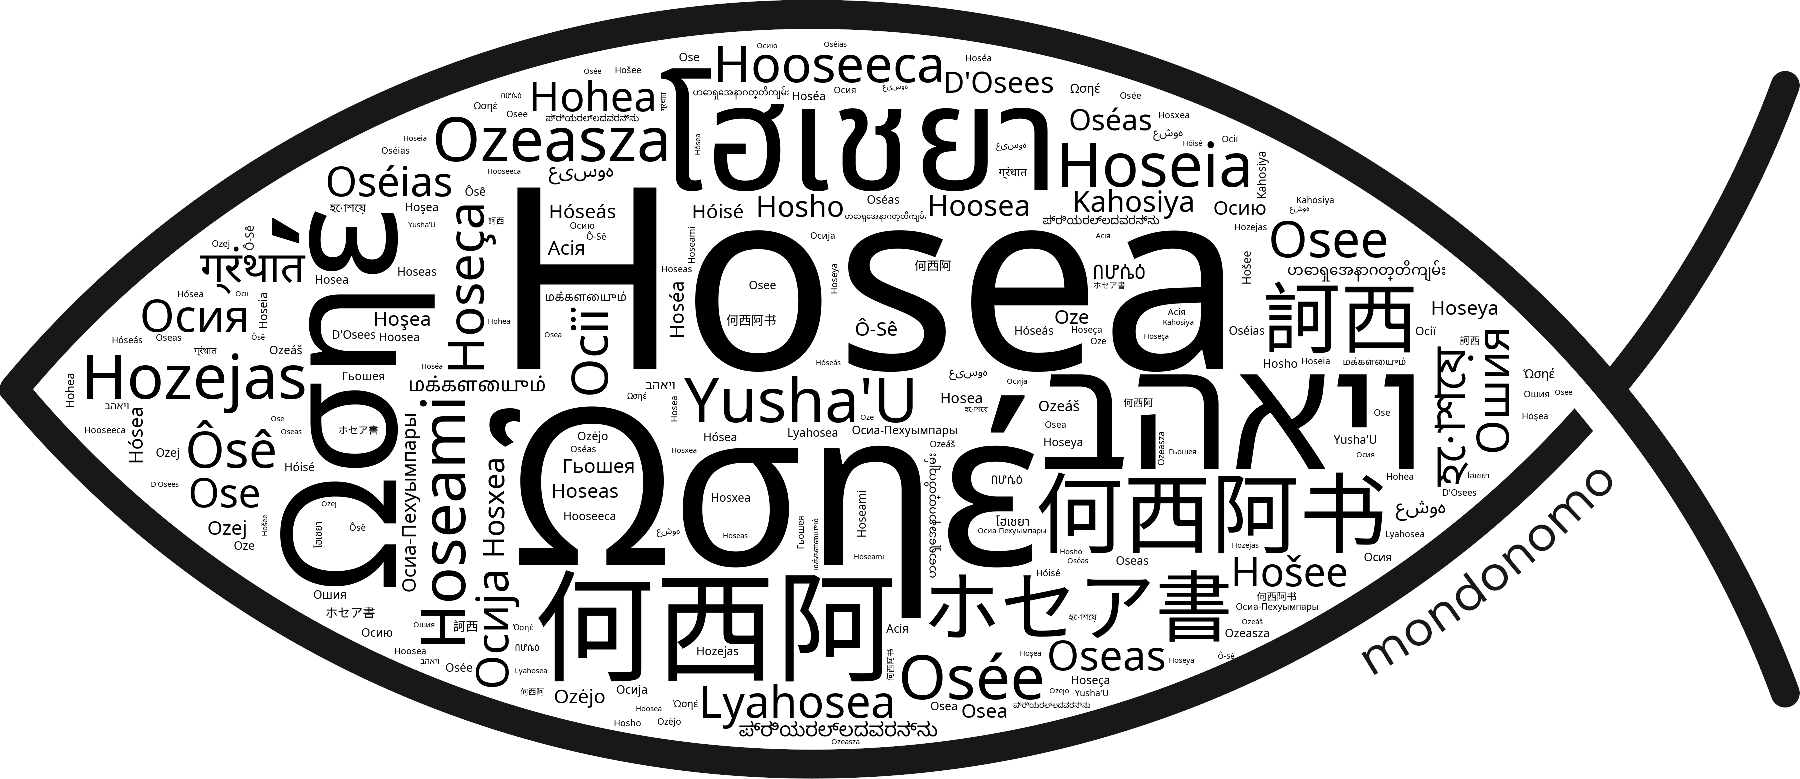 Name Hosea in the world's Bibles